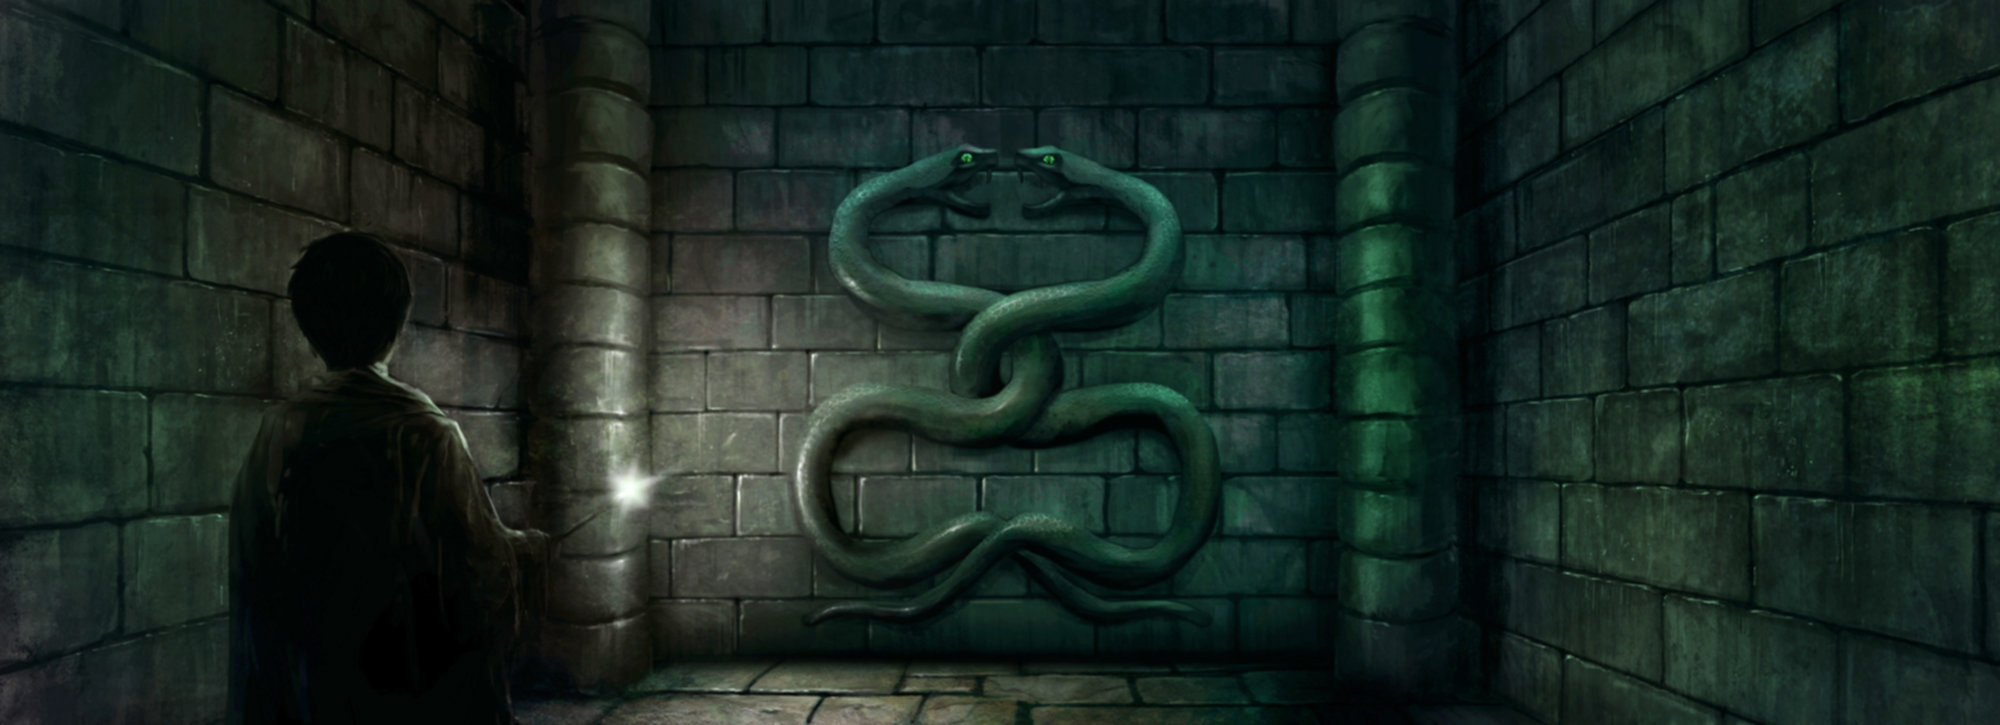 2.16 The Chamber of Secrets